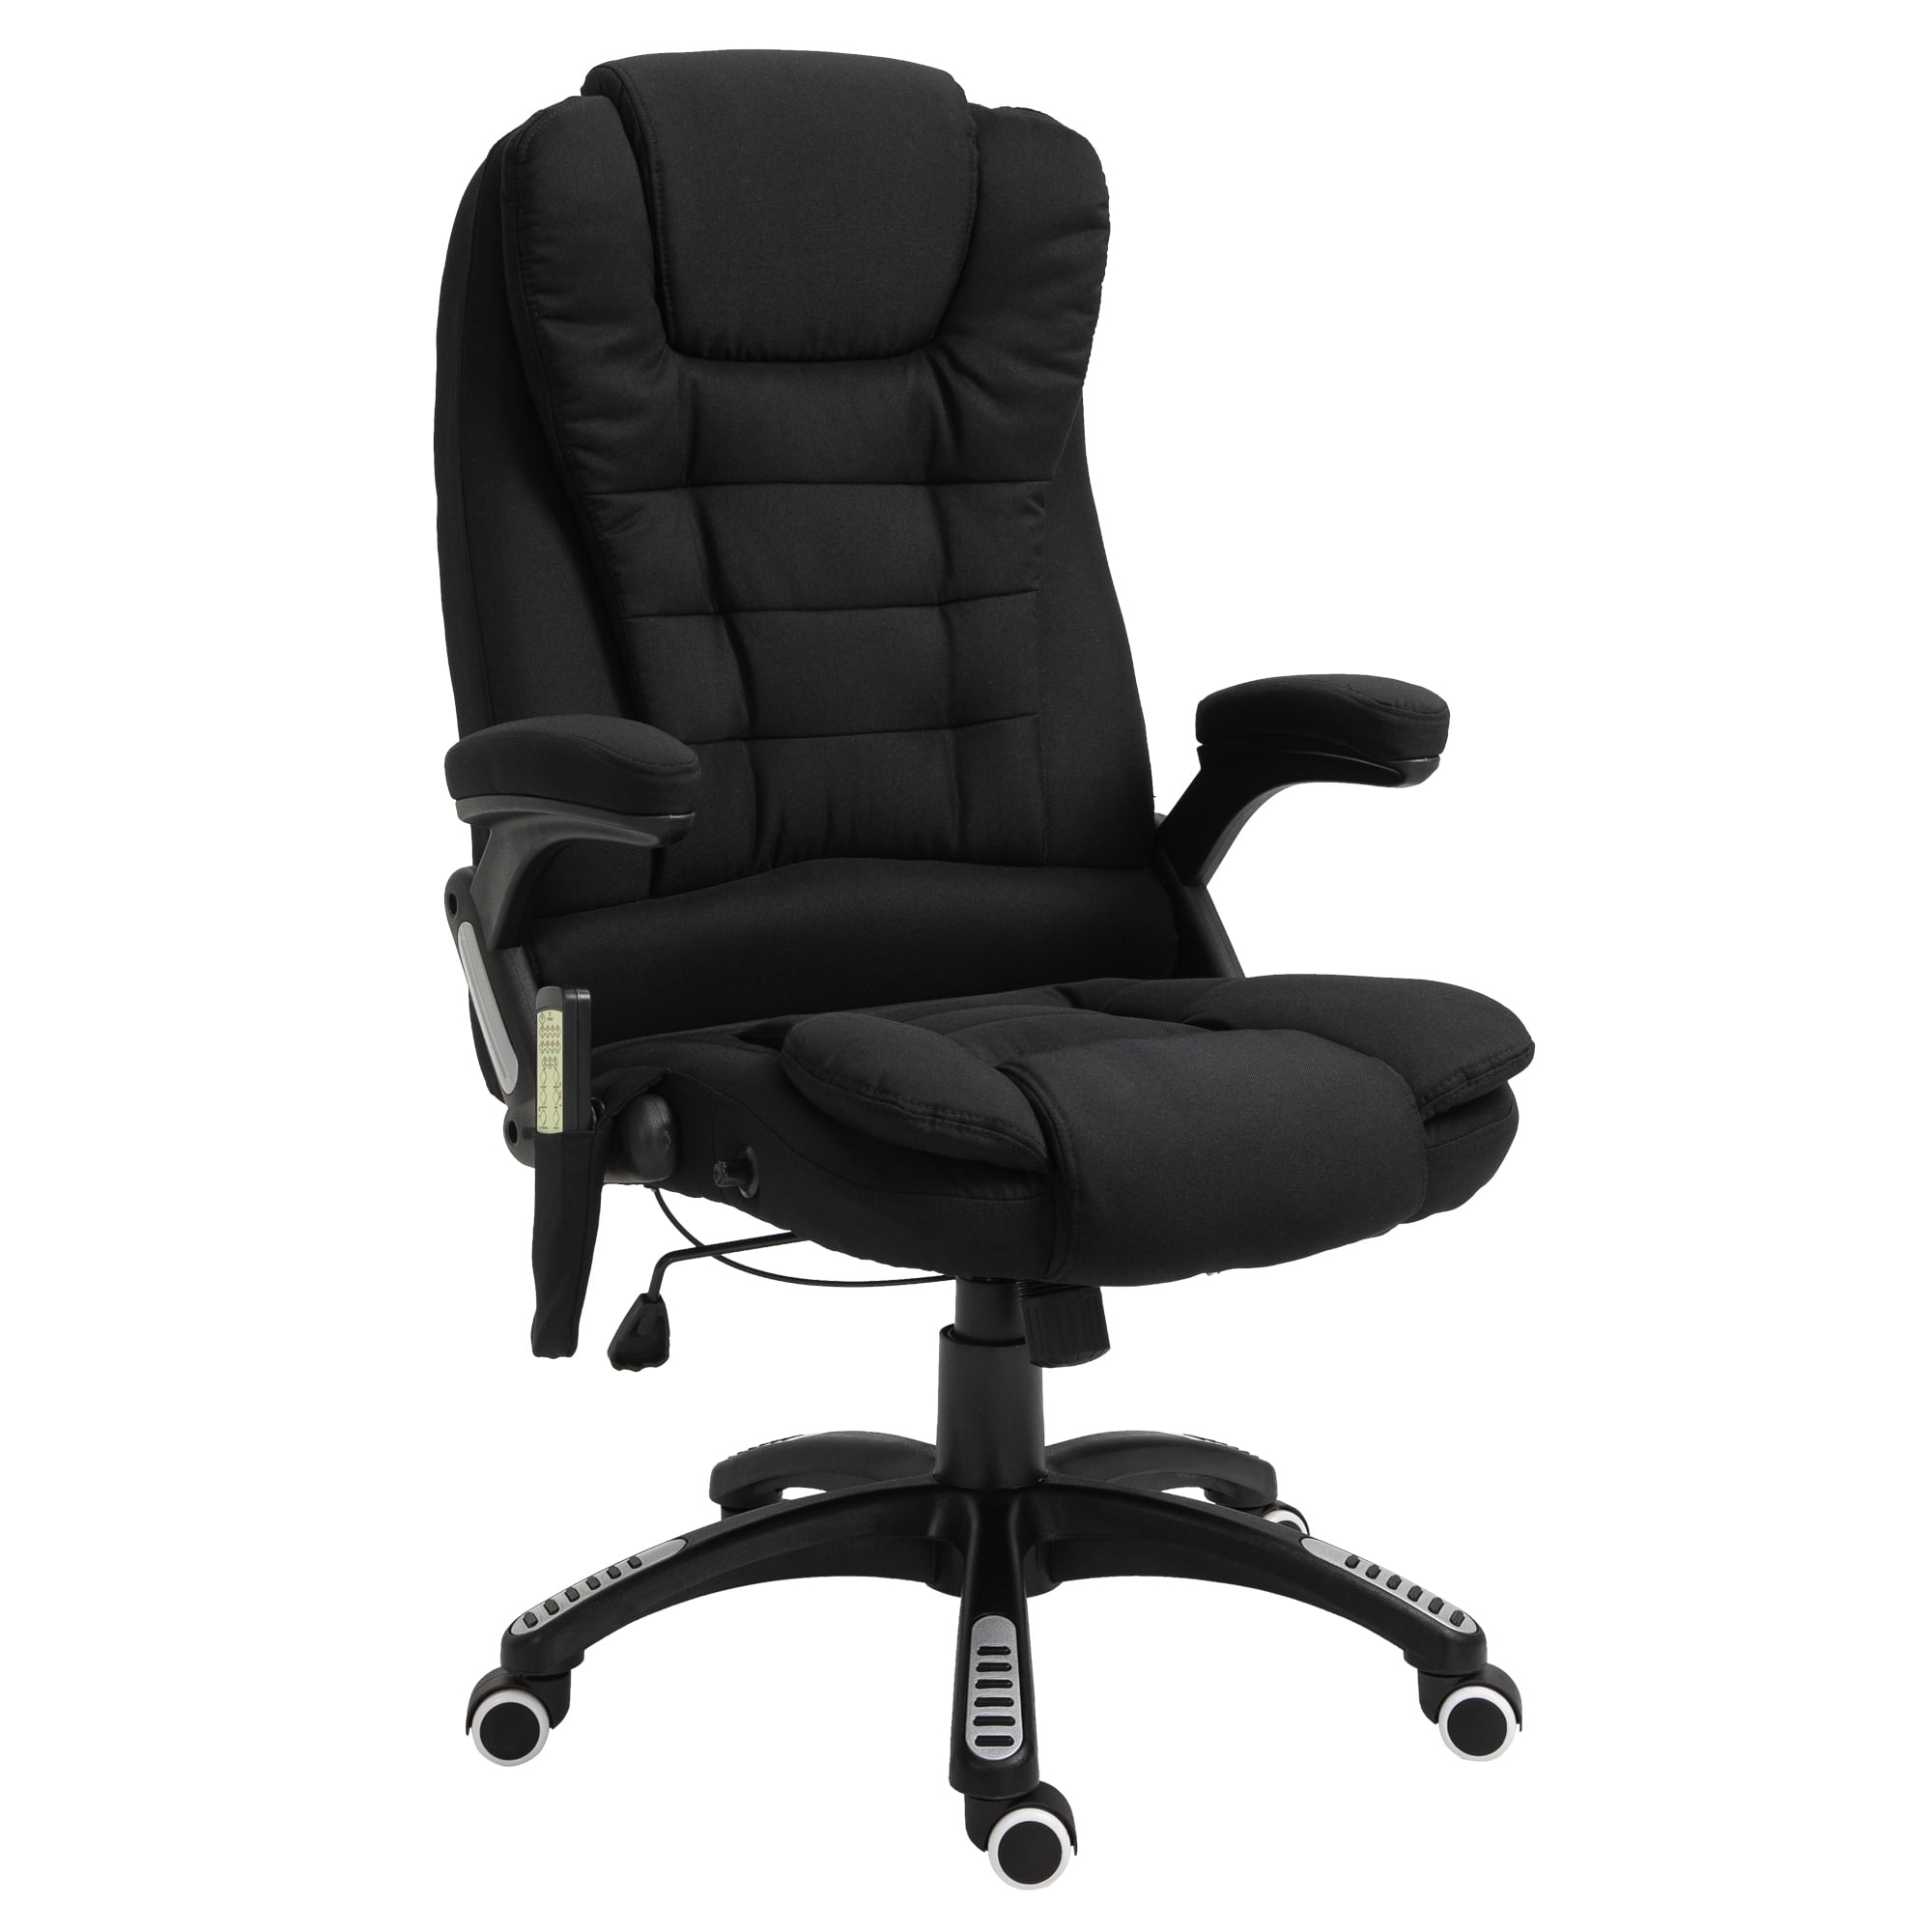 Vinsetto Ergonomic Vibrating Massage Office Chair High Back Executive Chair With Lumbar Support